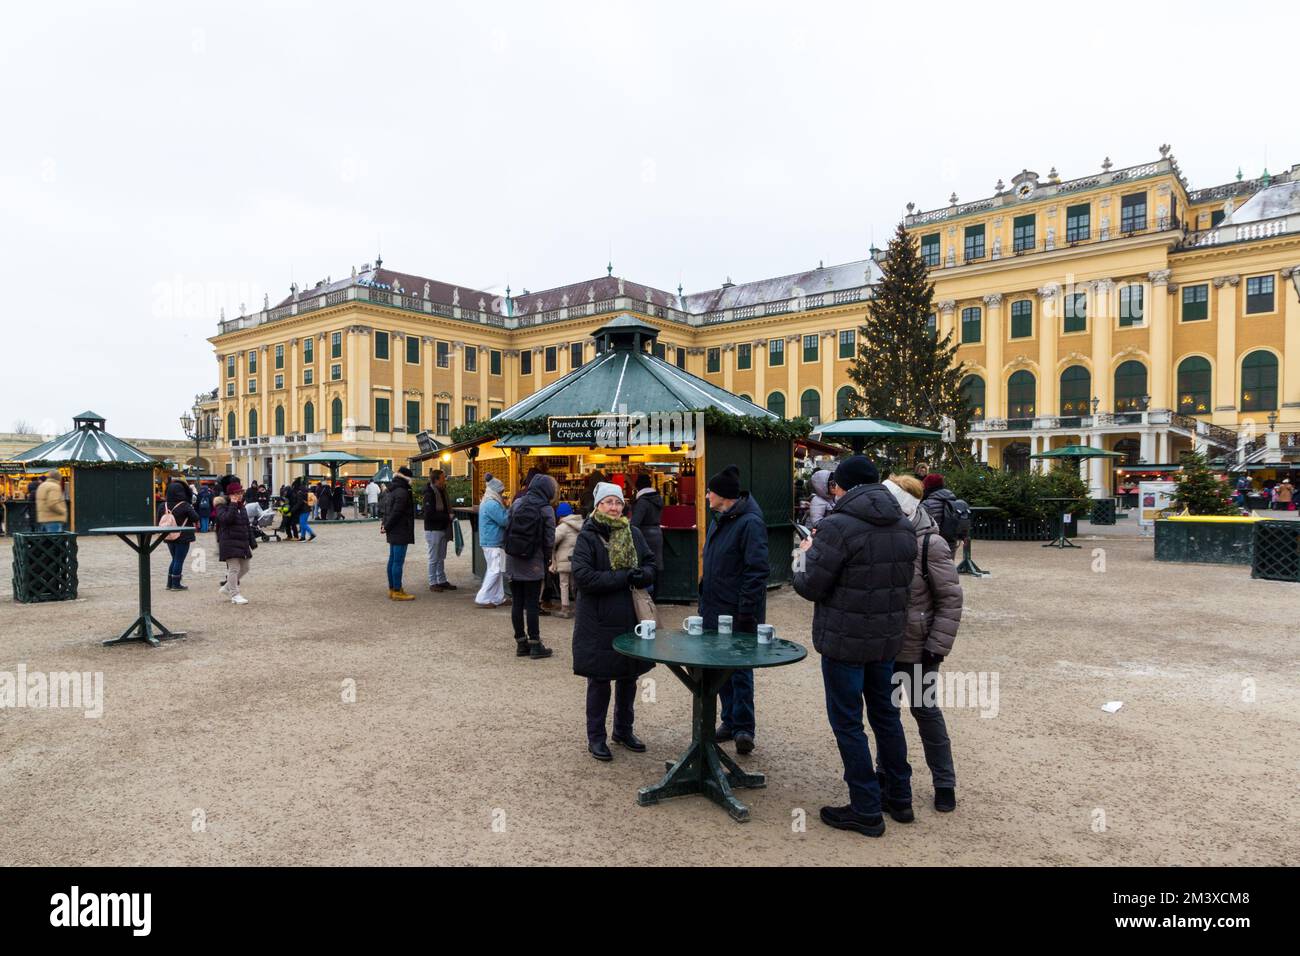 People visiting the Christmas Market at Schonbrunn Palace, Vienna, Austria Stock Photo